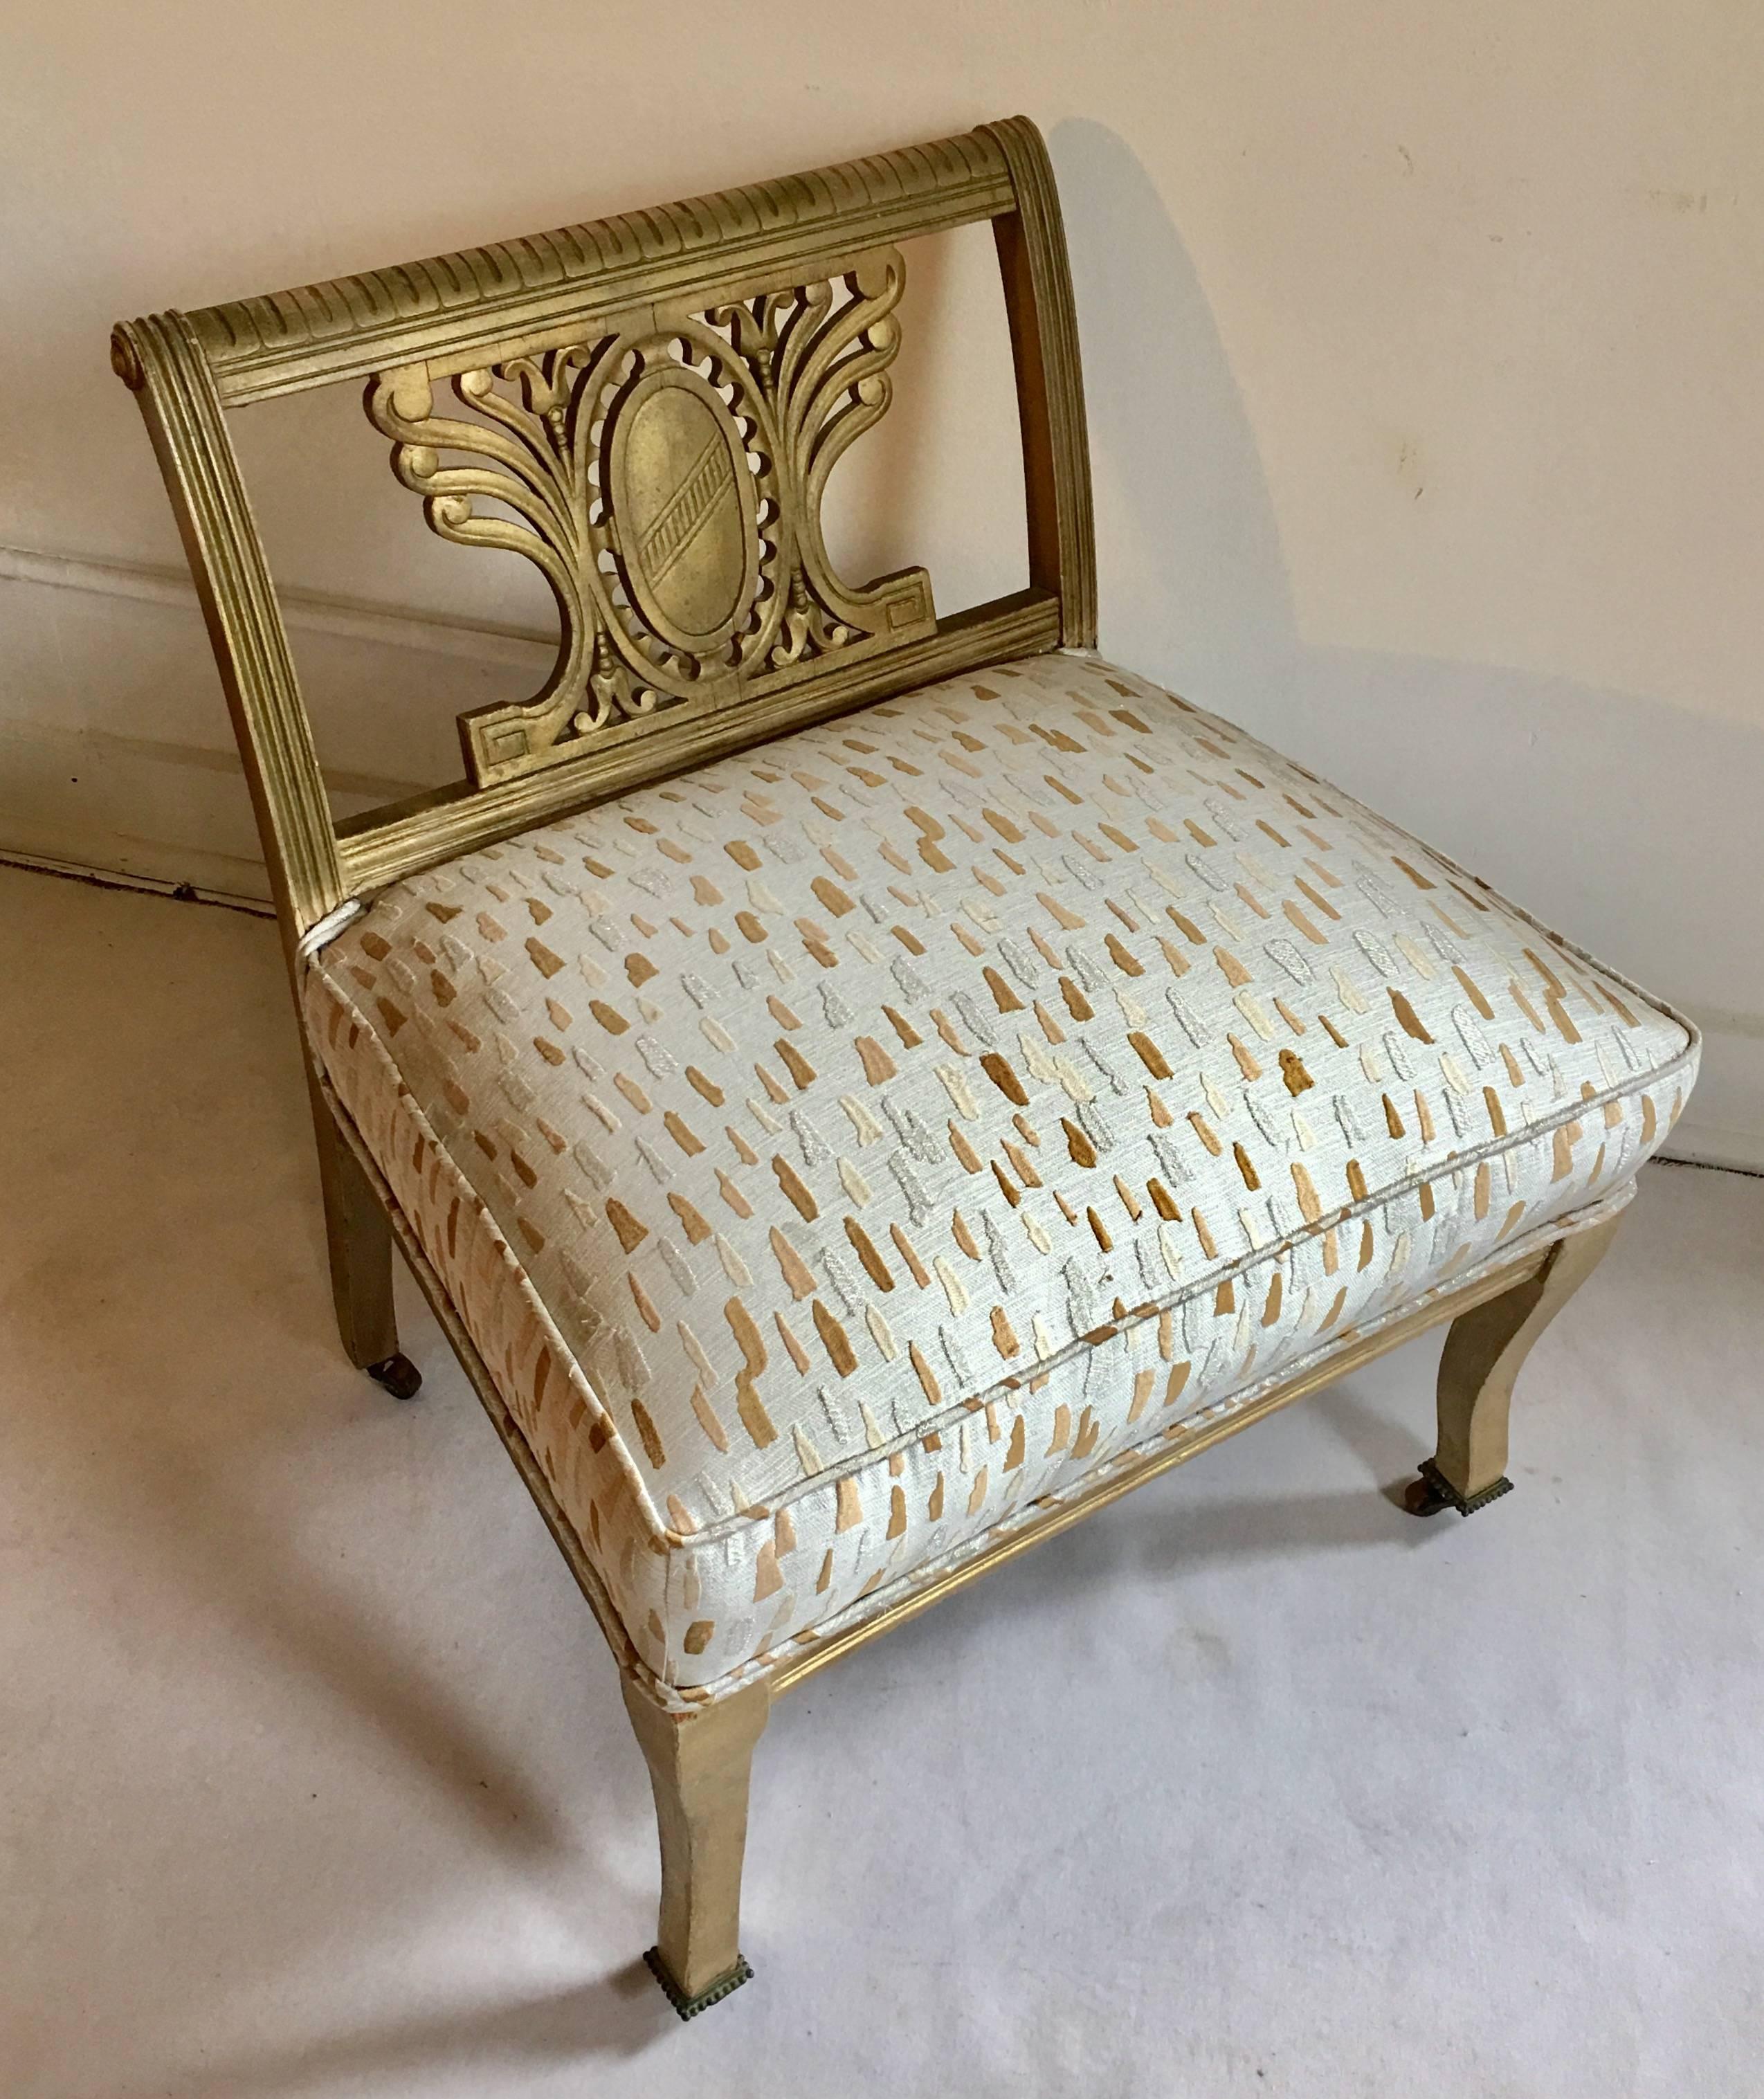 Mid-Century carved wood vanity chair or bench newly upholstered in Laura Kirar/Highland Court geode metallic thread fabric. Chair frame features a carved crest or shield back, scrolled details with Greek key motif and original aged gilt painted